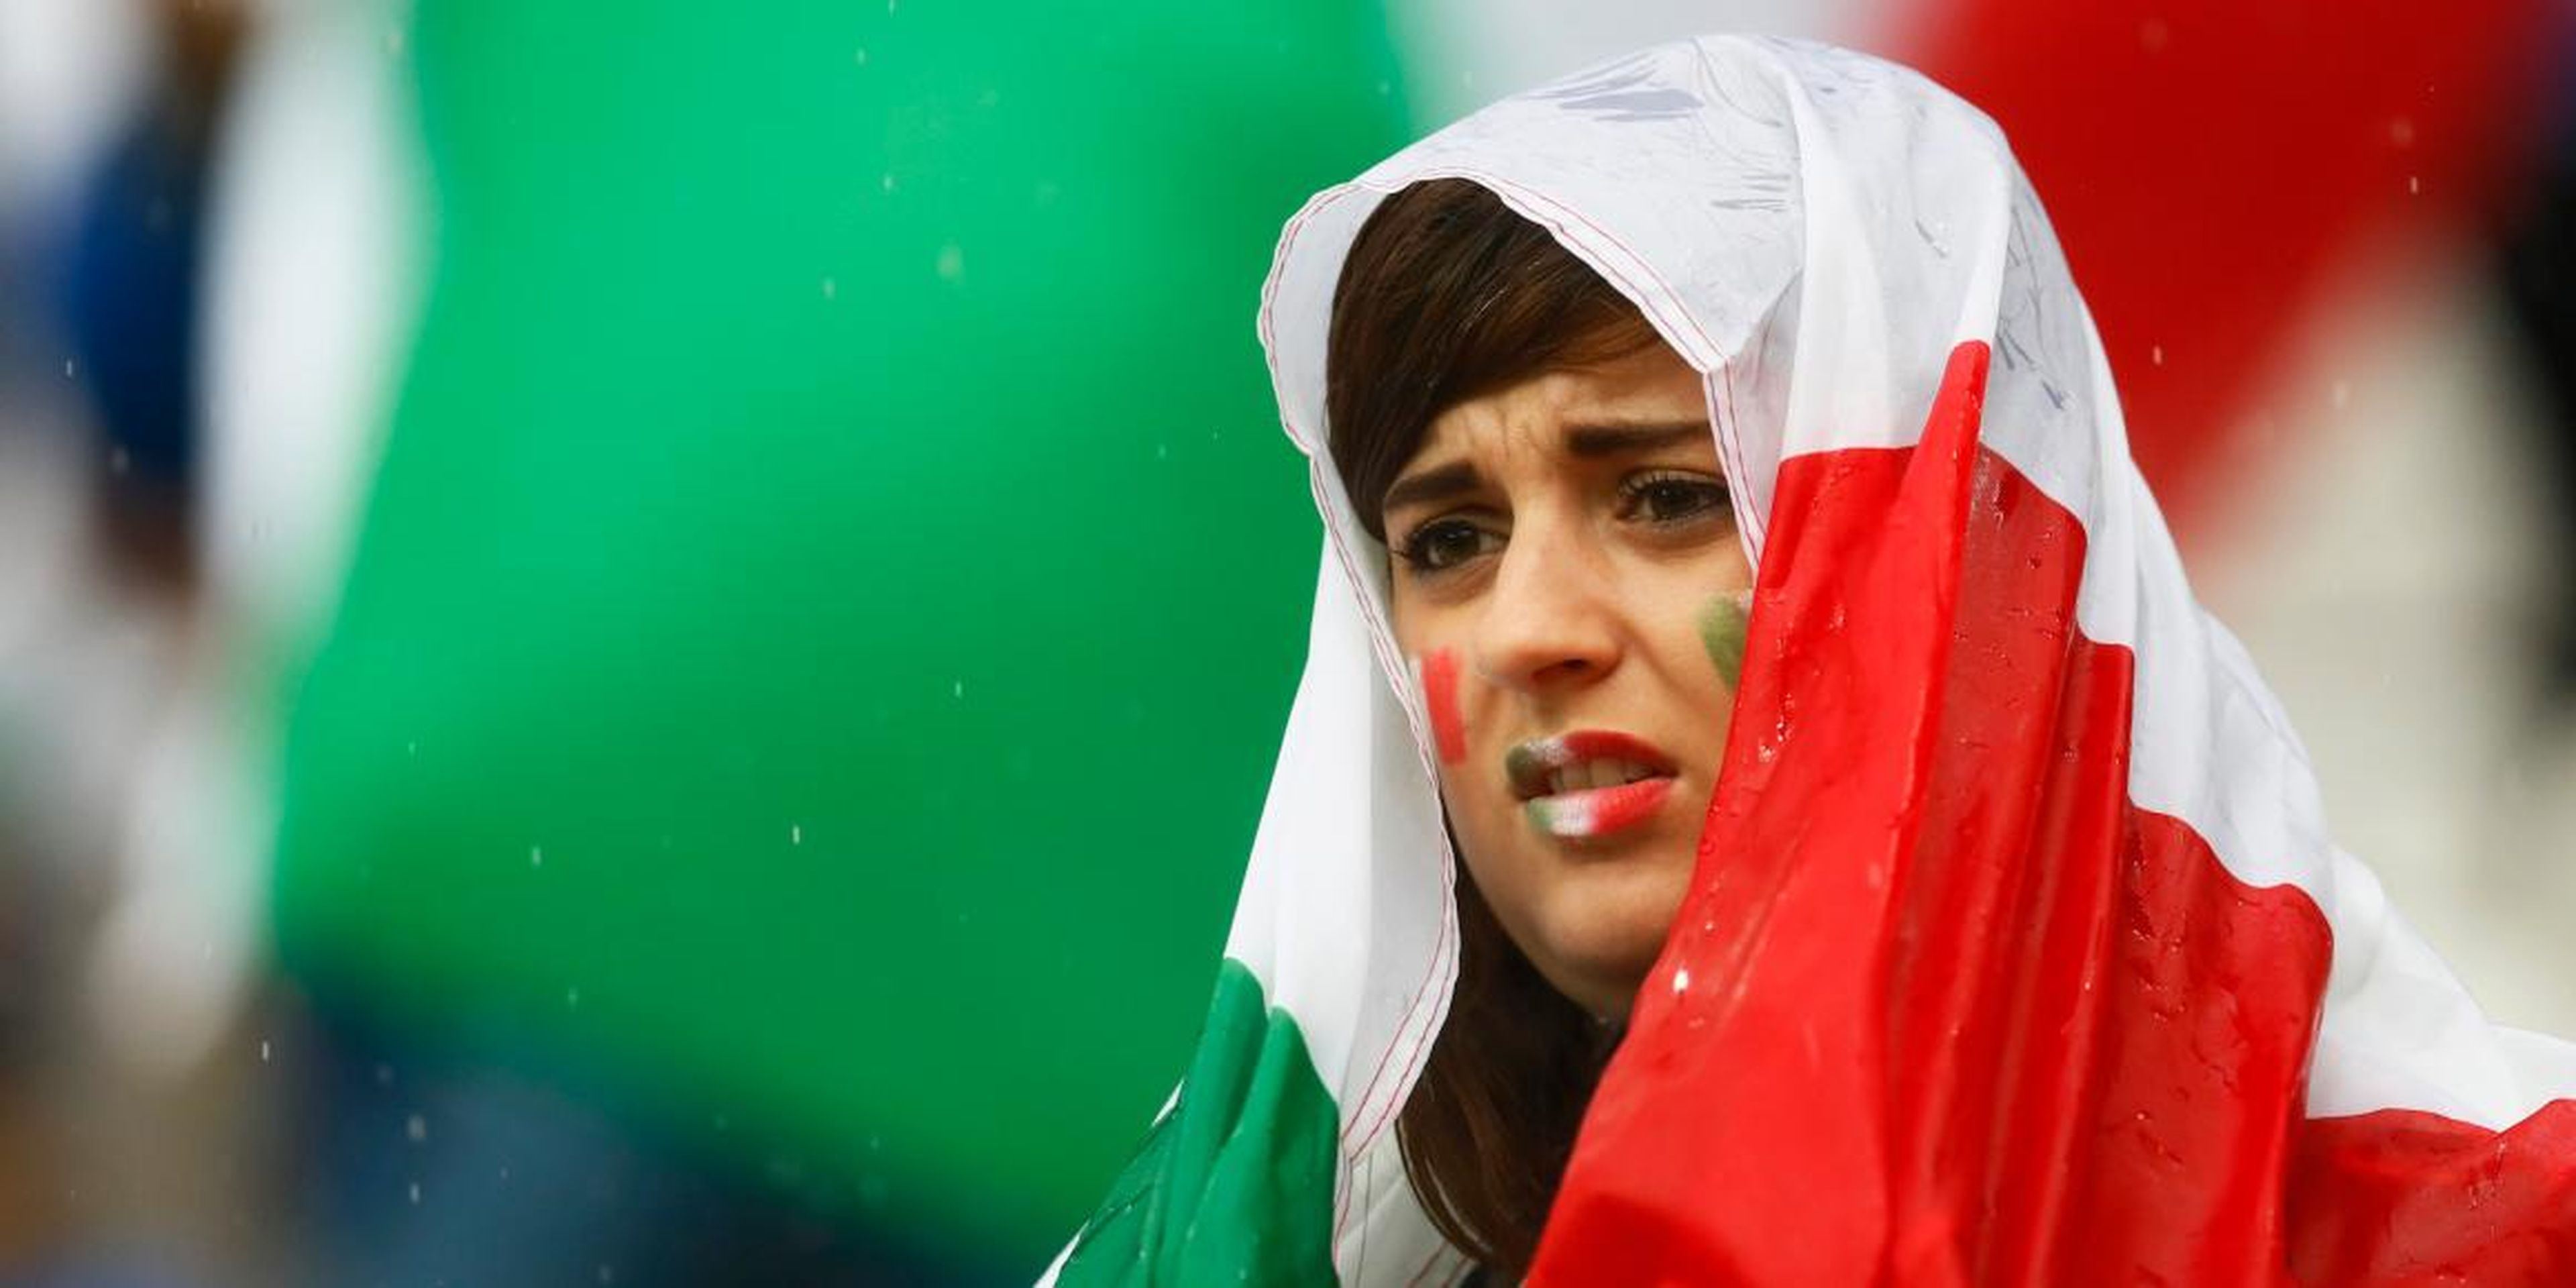 Italy fan before the match.